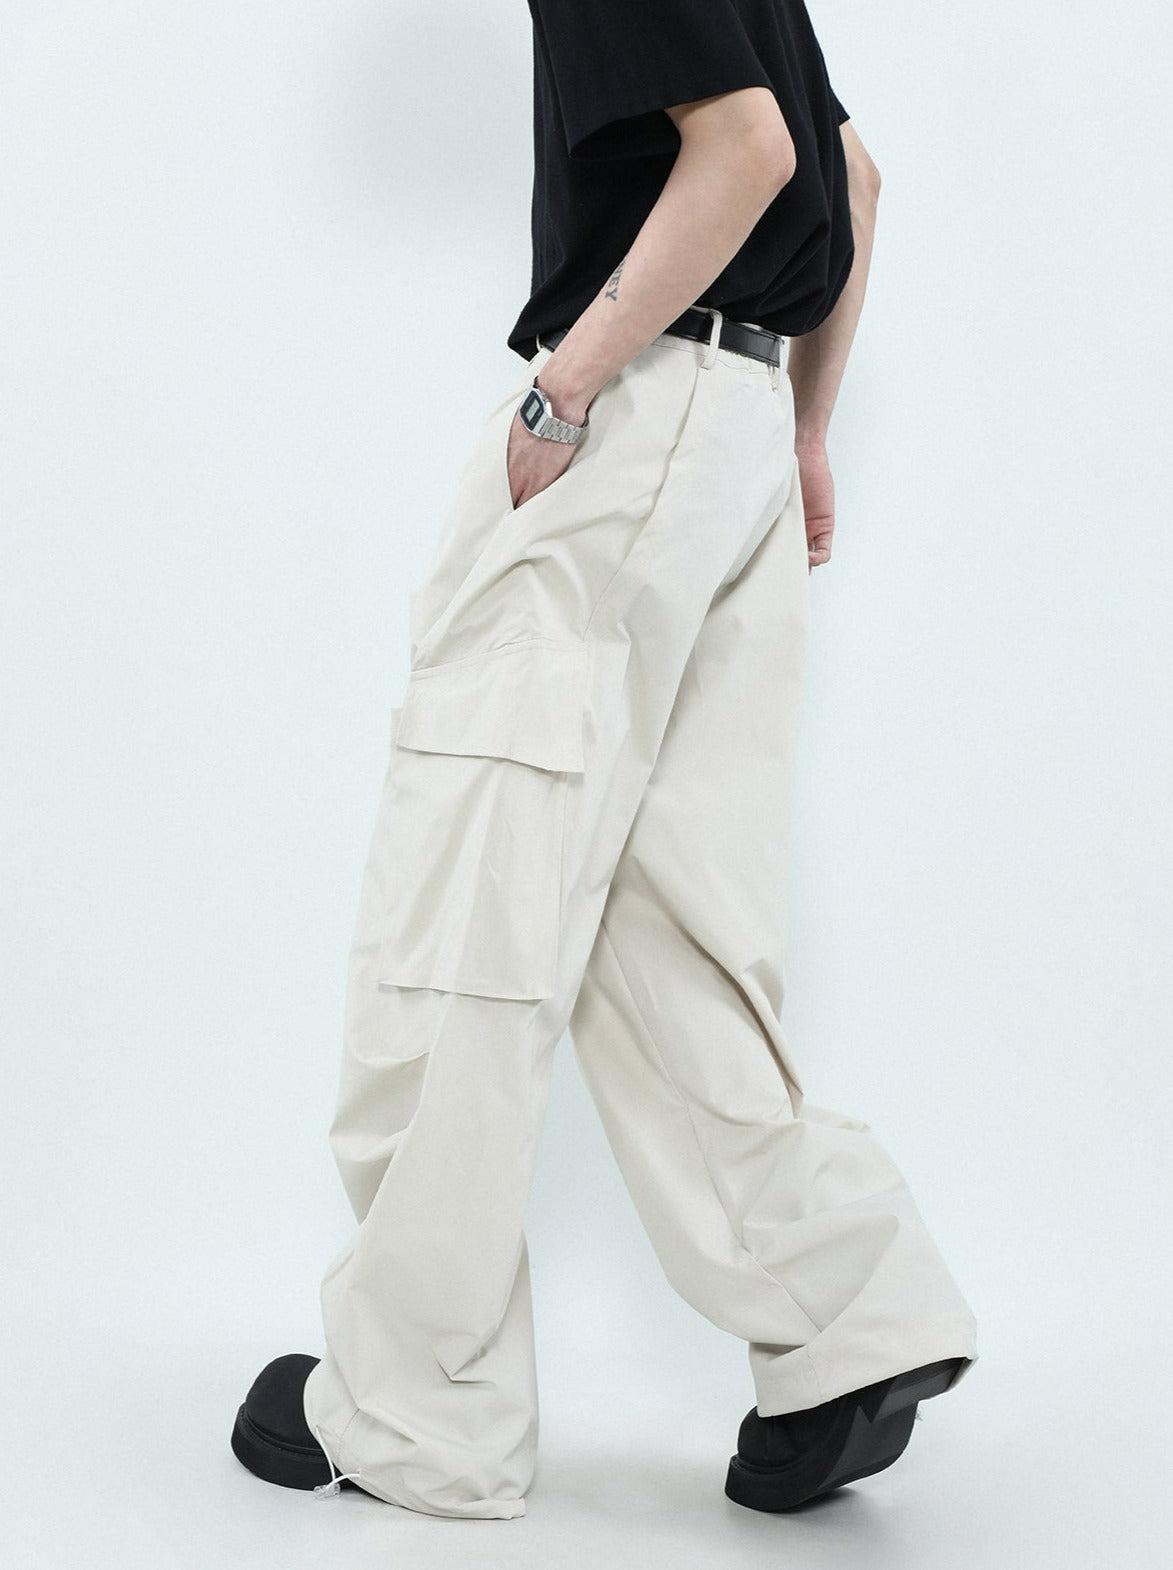 Solid Wide Leg Cargo Pants Korean Street Fashion Pants By Mr Nearly Shop Online at OH Vault